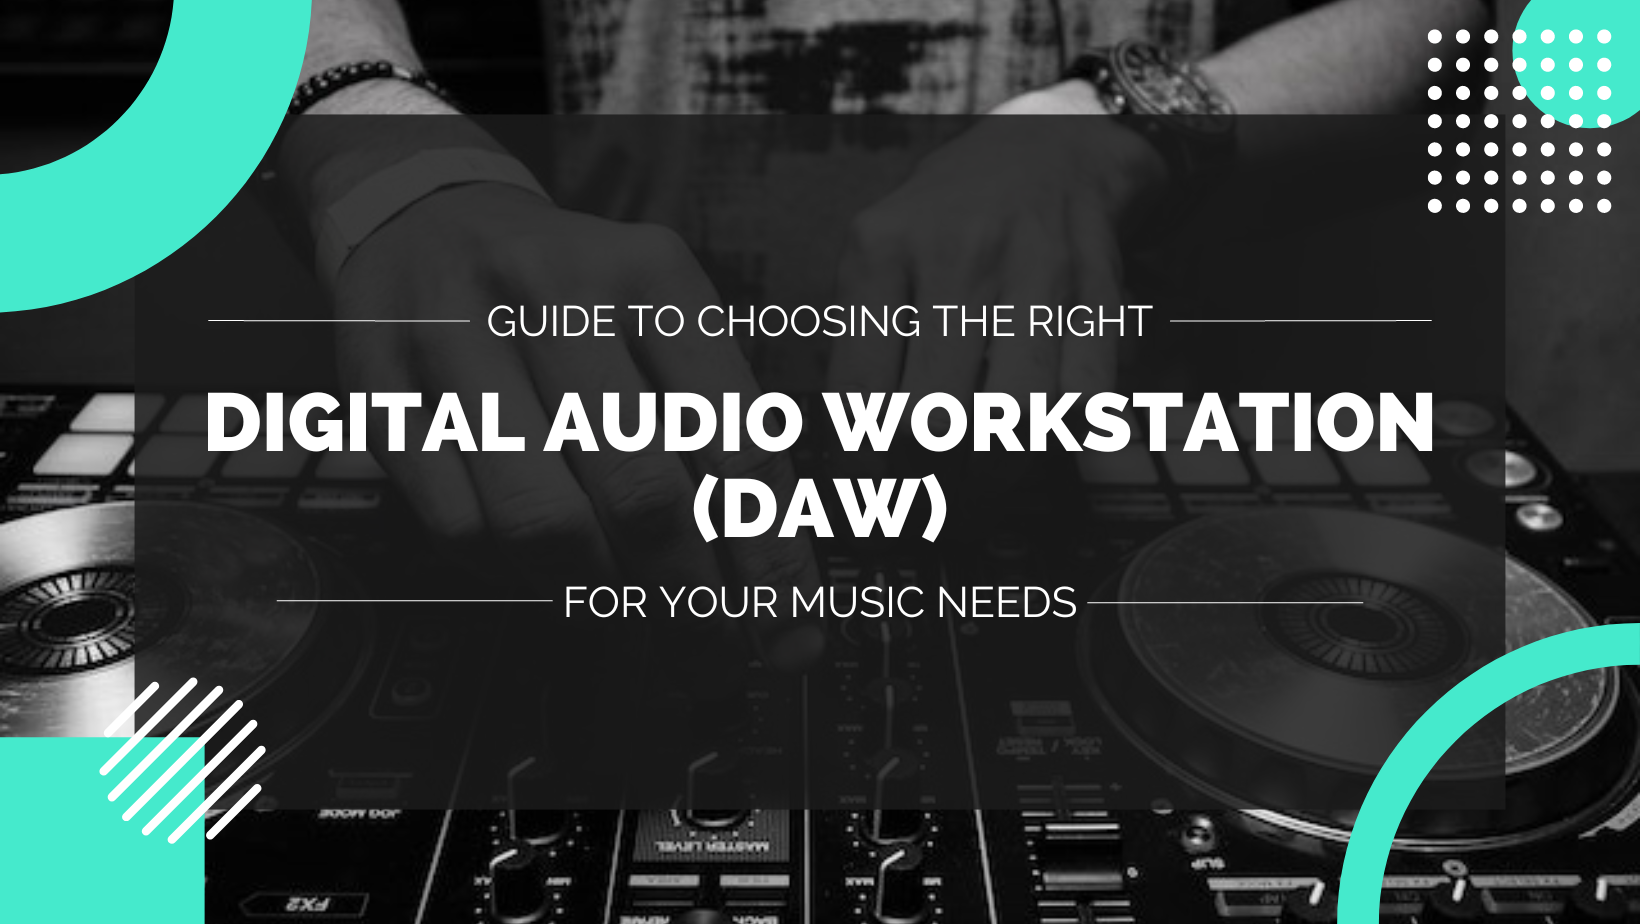 Guide to Choosing the Right Digital Audio Workstation (DAW) for Your Music Needs